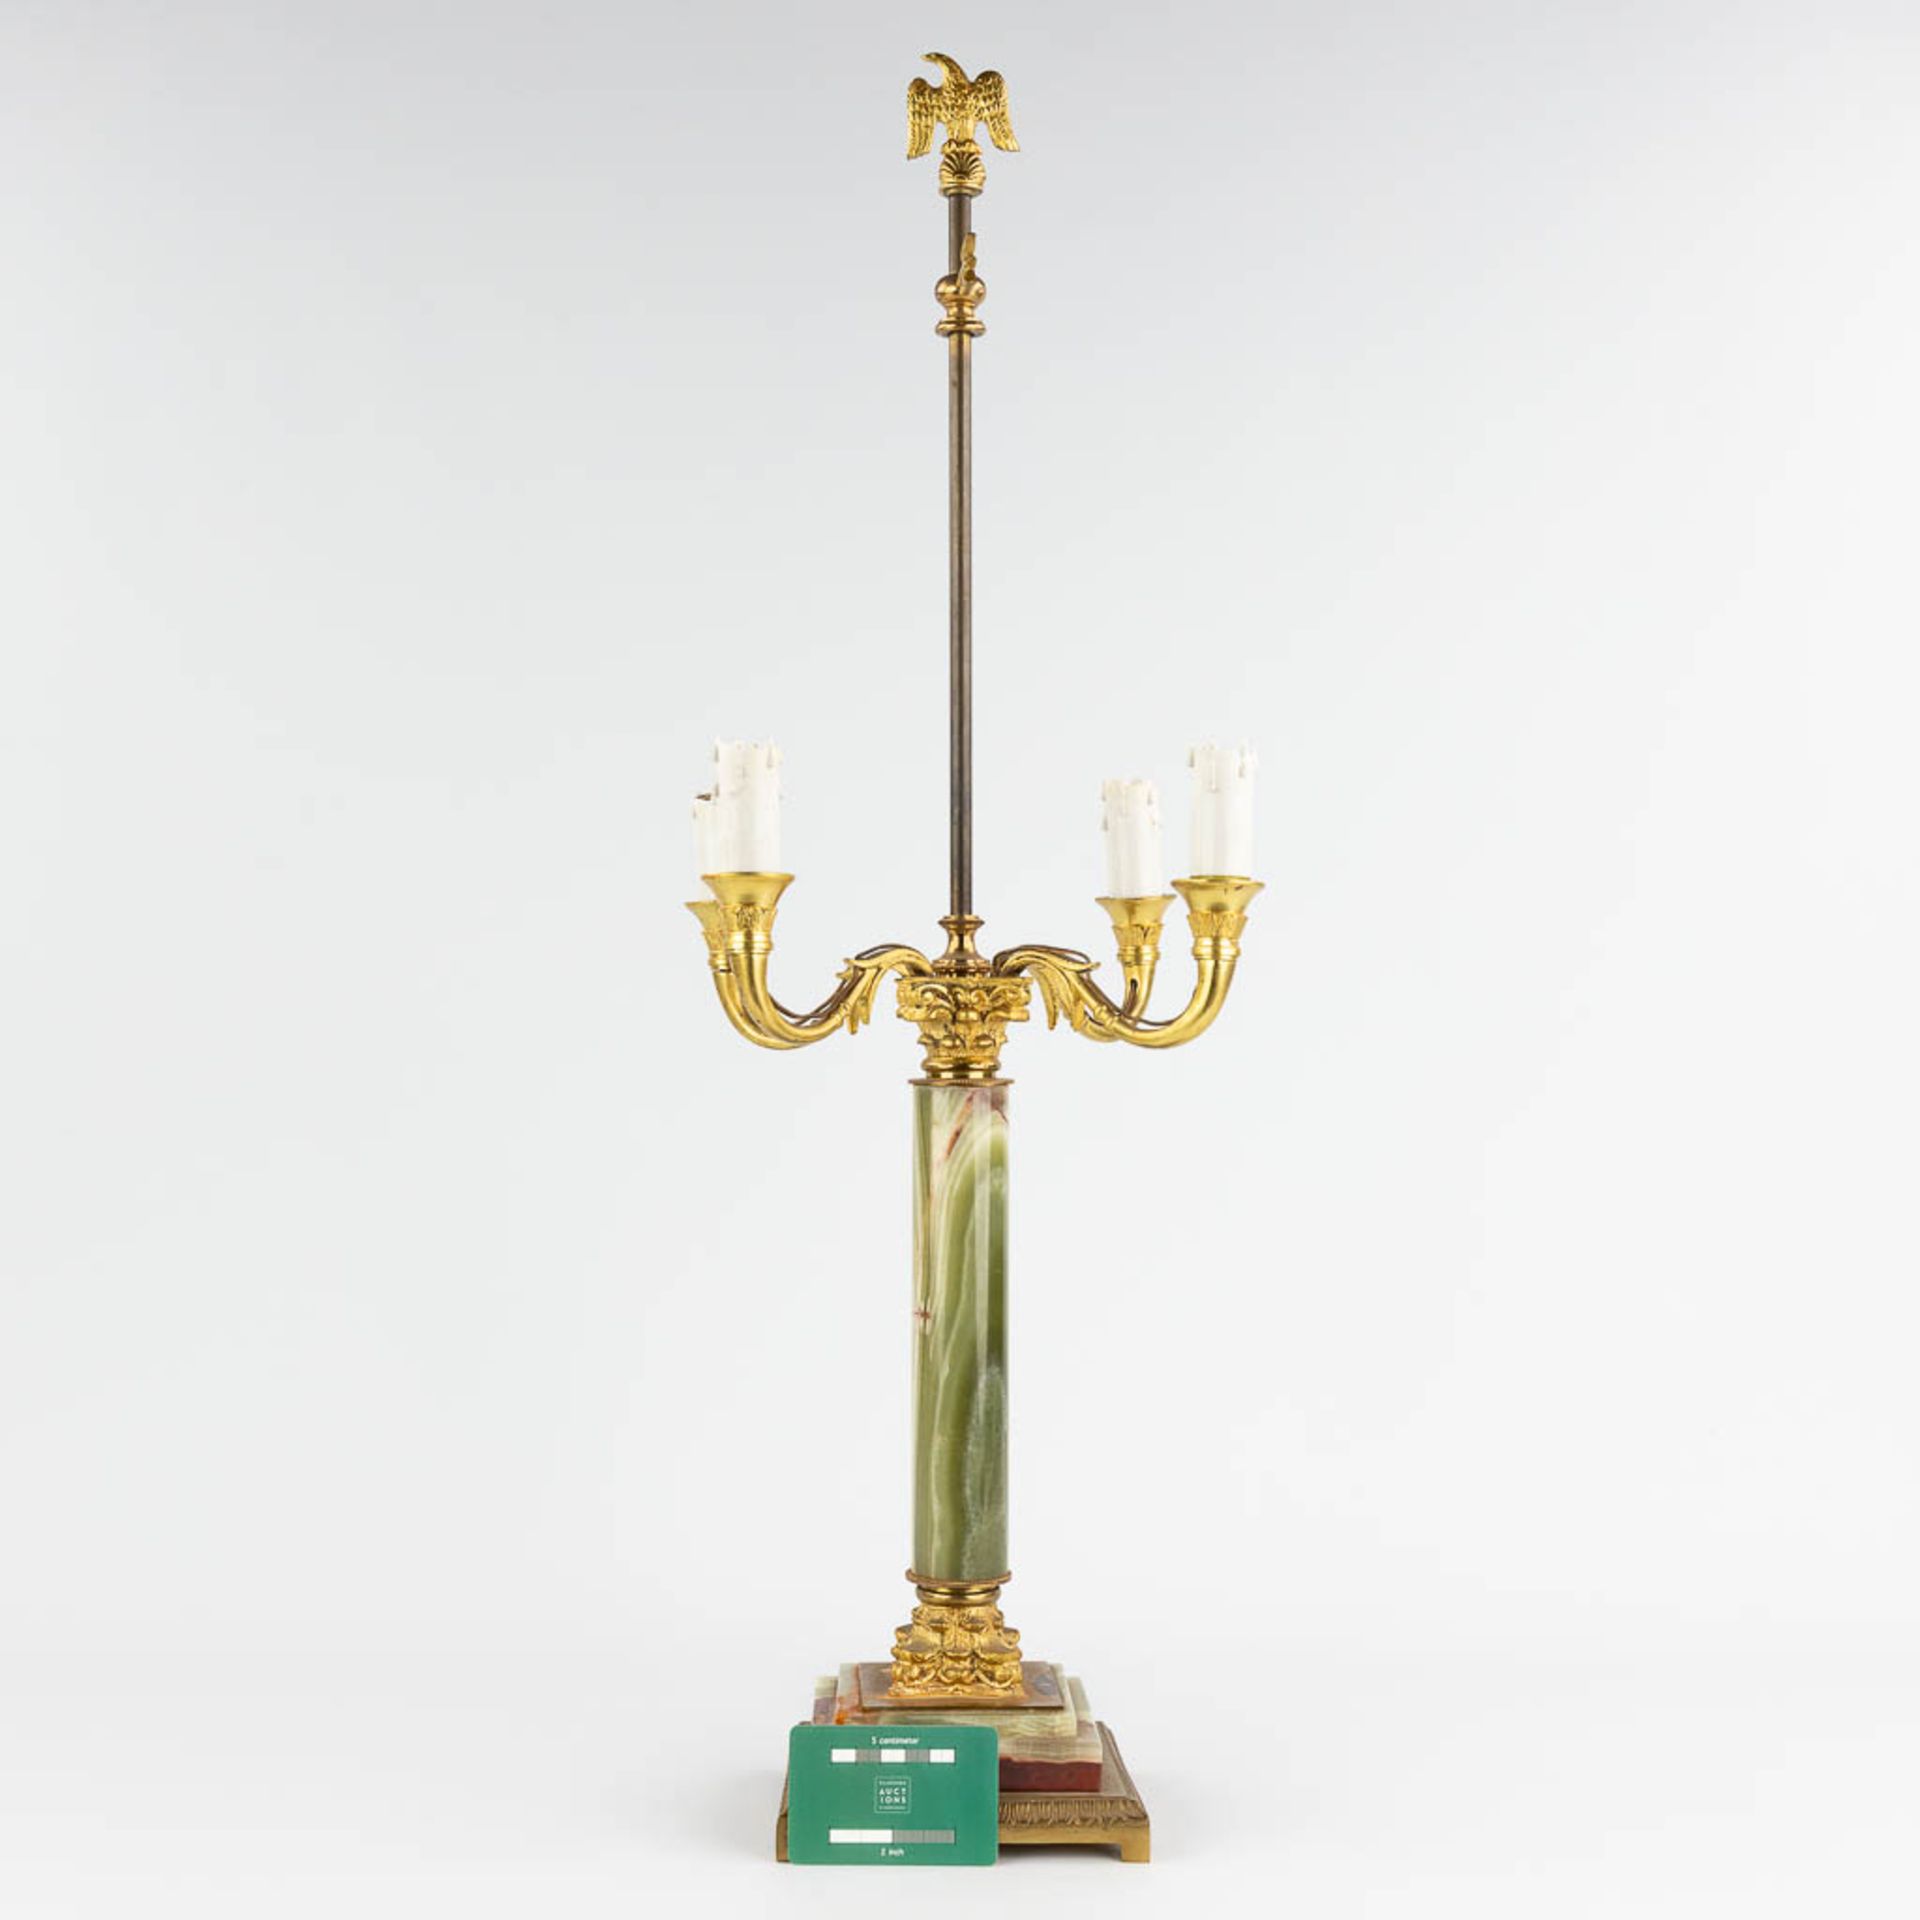 A table lamp, brass and onyx. 20th century. (L: 30 x W: 30 x H: 77 cm) - Image 2 of 13